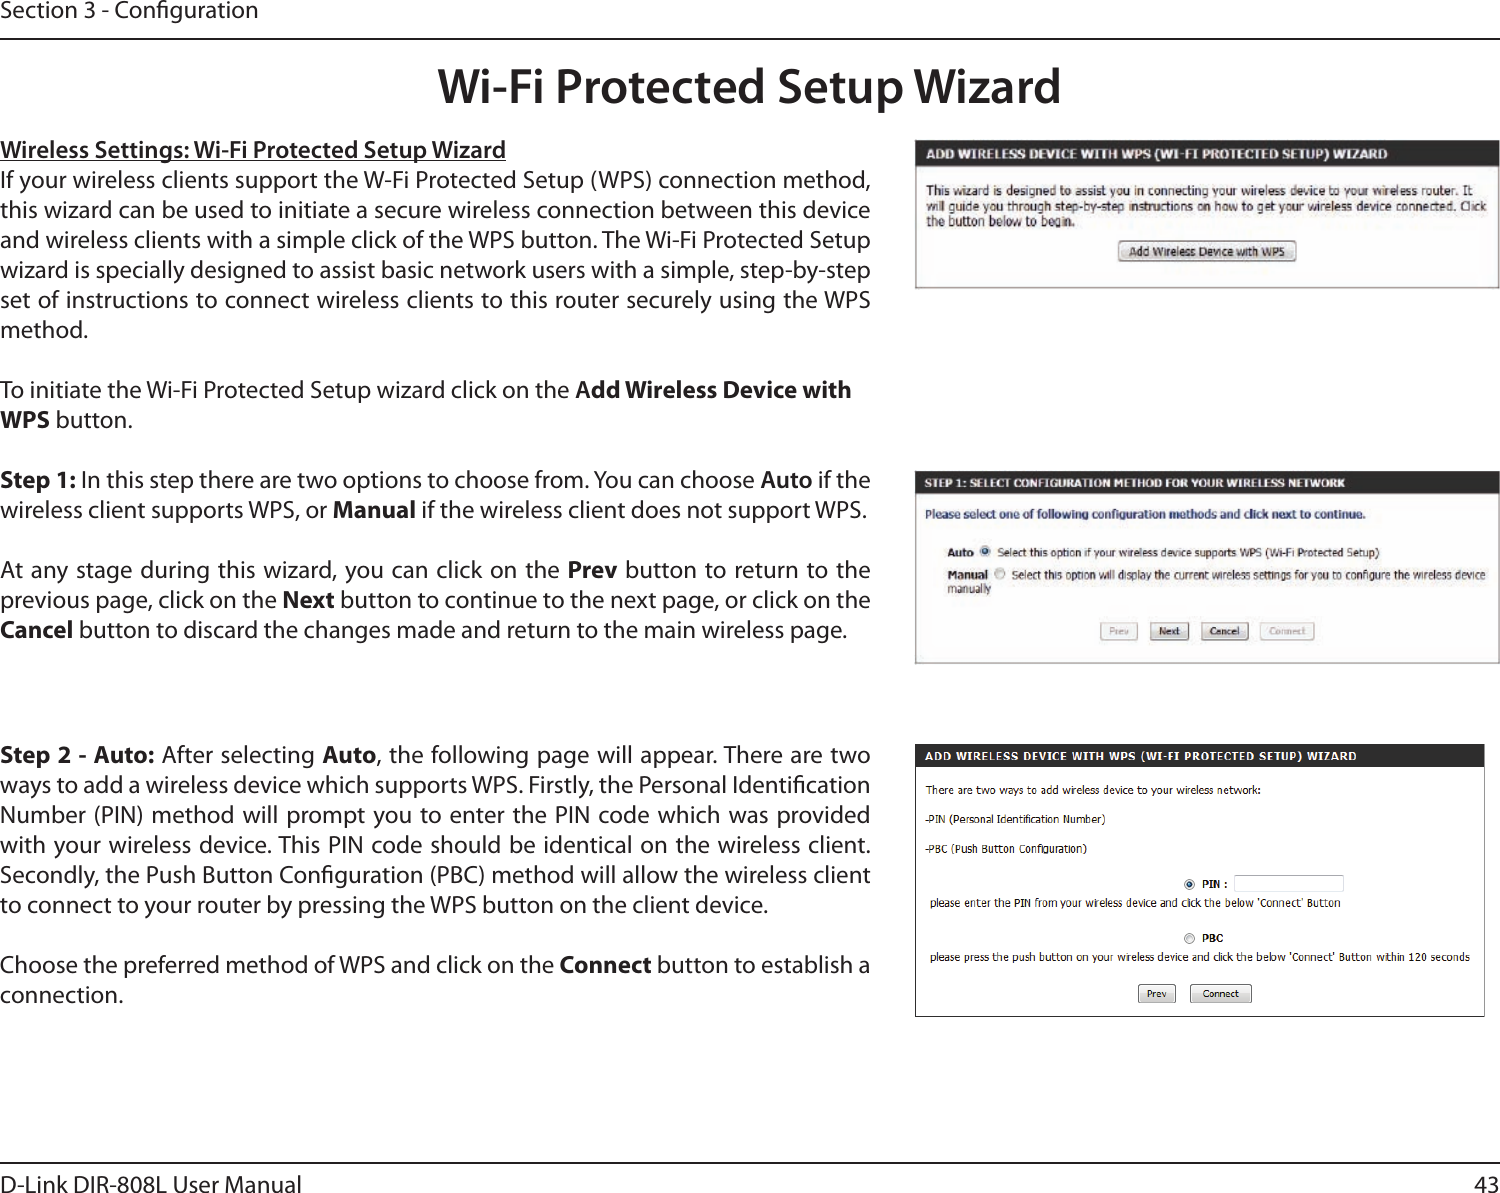 43D-Link DIR-808L User ManualSection 3 - CongurationWireless Settings: Wi-Fi Protected Setup WizardIf your wireless clients support the W-Fi Protected Setup (WPS) connection method, this wizard can be used to initiate a secure wireless connection between this device and wireless clients with a simple click of the WPS button. The Wi-Fi Protected Setup wizard is specially designed to assist basic network users with a simple, step-by-step set of instructions to connect wireless clients to this router securely using the WPS method.To initiate the Wi-Fi Protected Setup wizard click on the Add Wireless Device with WPS button.Step 1: In this step there are two options to choose from. You can choose Auto if the wireless client supports WPS, or Manual if the wireless client does not support WPS.At any stage during this wizard, you can click on the Prev button to return to the previous page, click on the Next button to continue to the next page, or click on the Cancel button to discard the changes made and return to the main wireless page.Step 2 - Auto: After selecting Auto, the following page will appear. There are two ways to add a wireless device which supports WPS. Firstly, the Personal Identication  Number (PIN) method will prompt you to enter the PIN code which was provided with your wireless device. This PIN code should be identical on the wireless client. Secondly, the Push Button Conguration (PBC) method will allow the wireless client to connect to your router by pressing the WPS button on the client device.Choose the preferred method of WPS and click on the Connect button to establish a connection. Wi-Fi Protected Setup Wizard